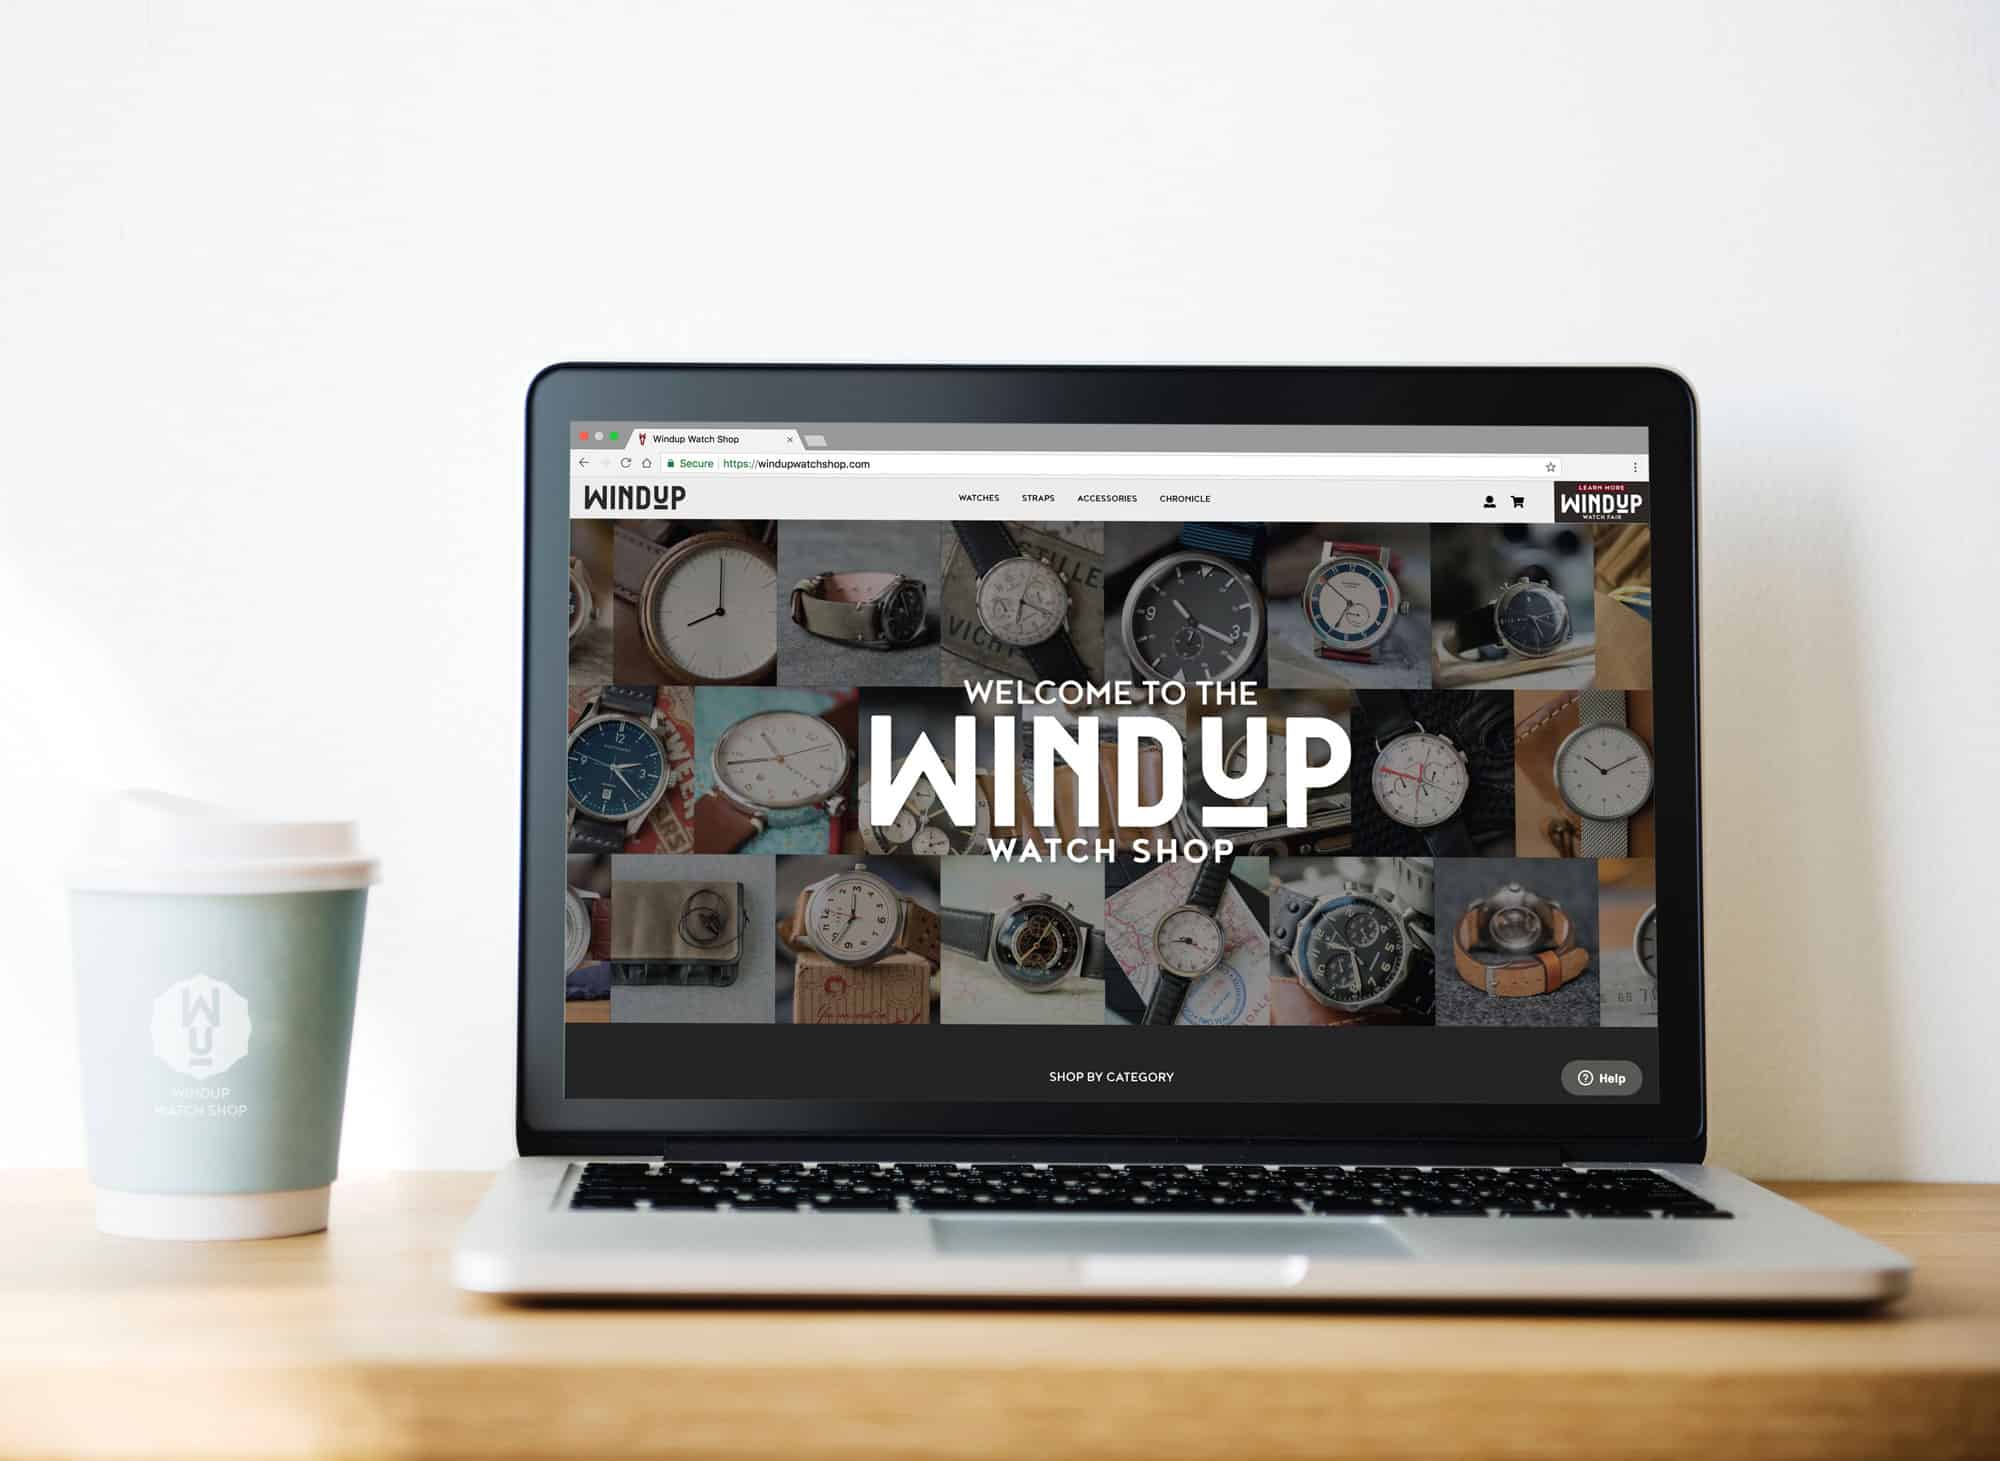 Introducing the Windup Watch Shop